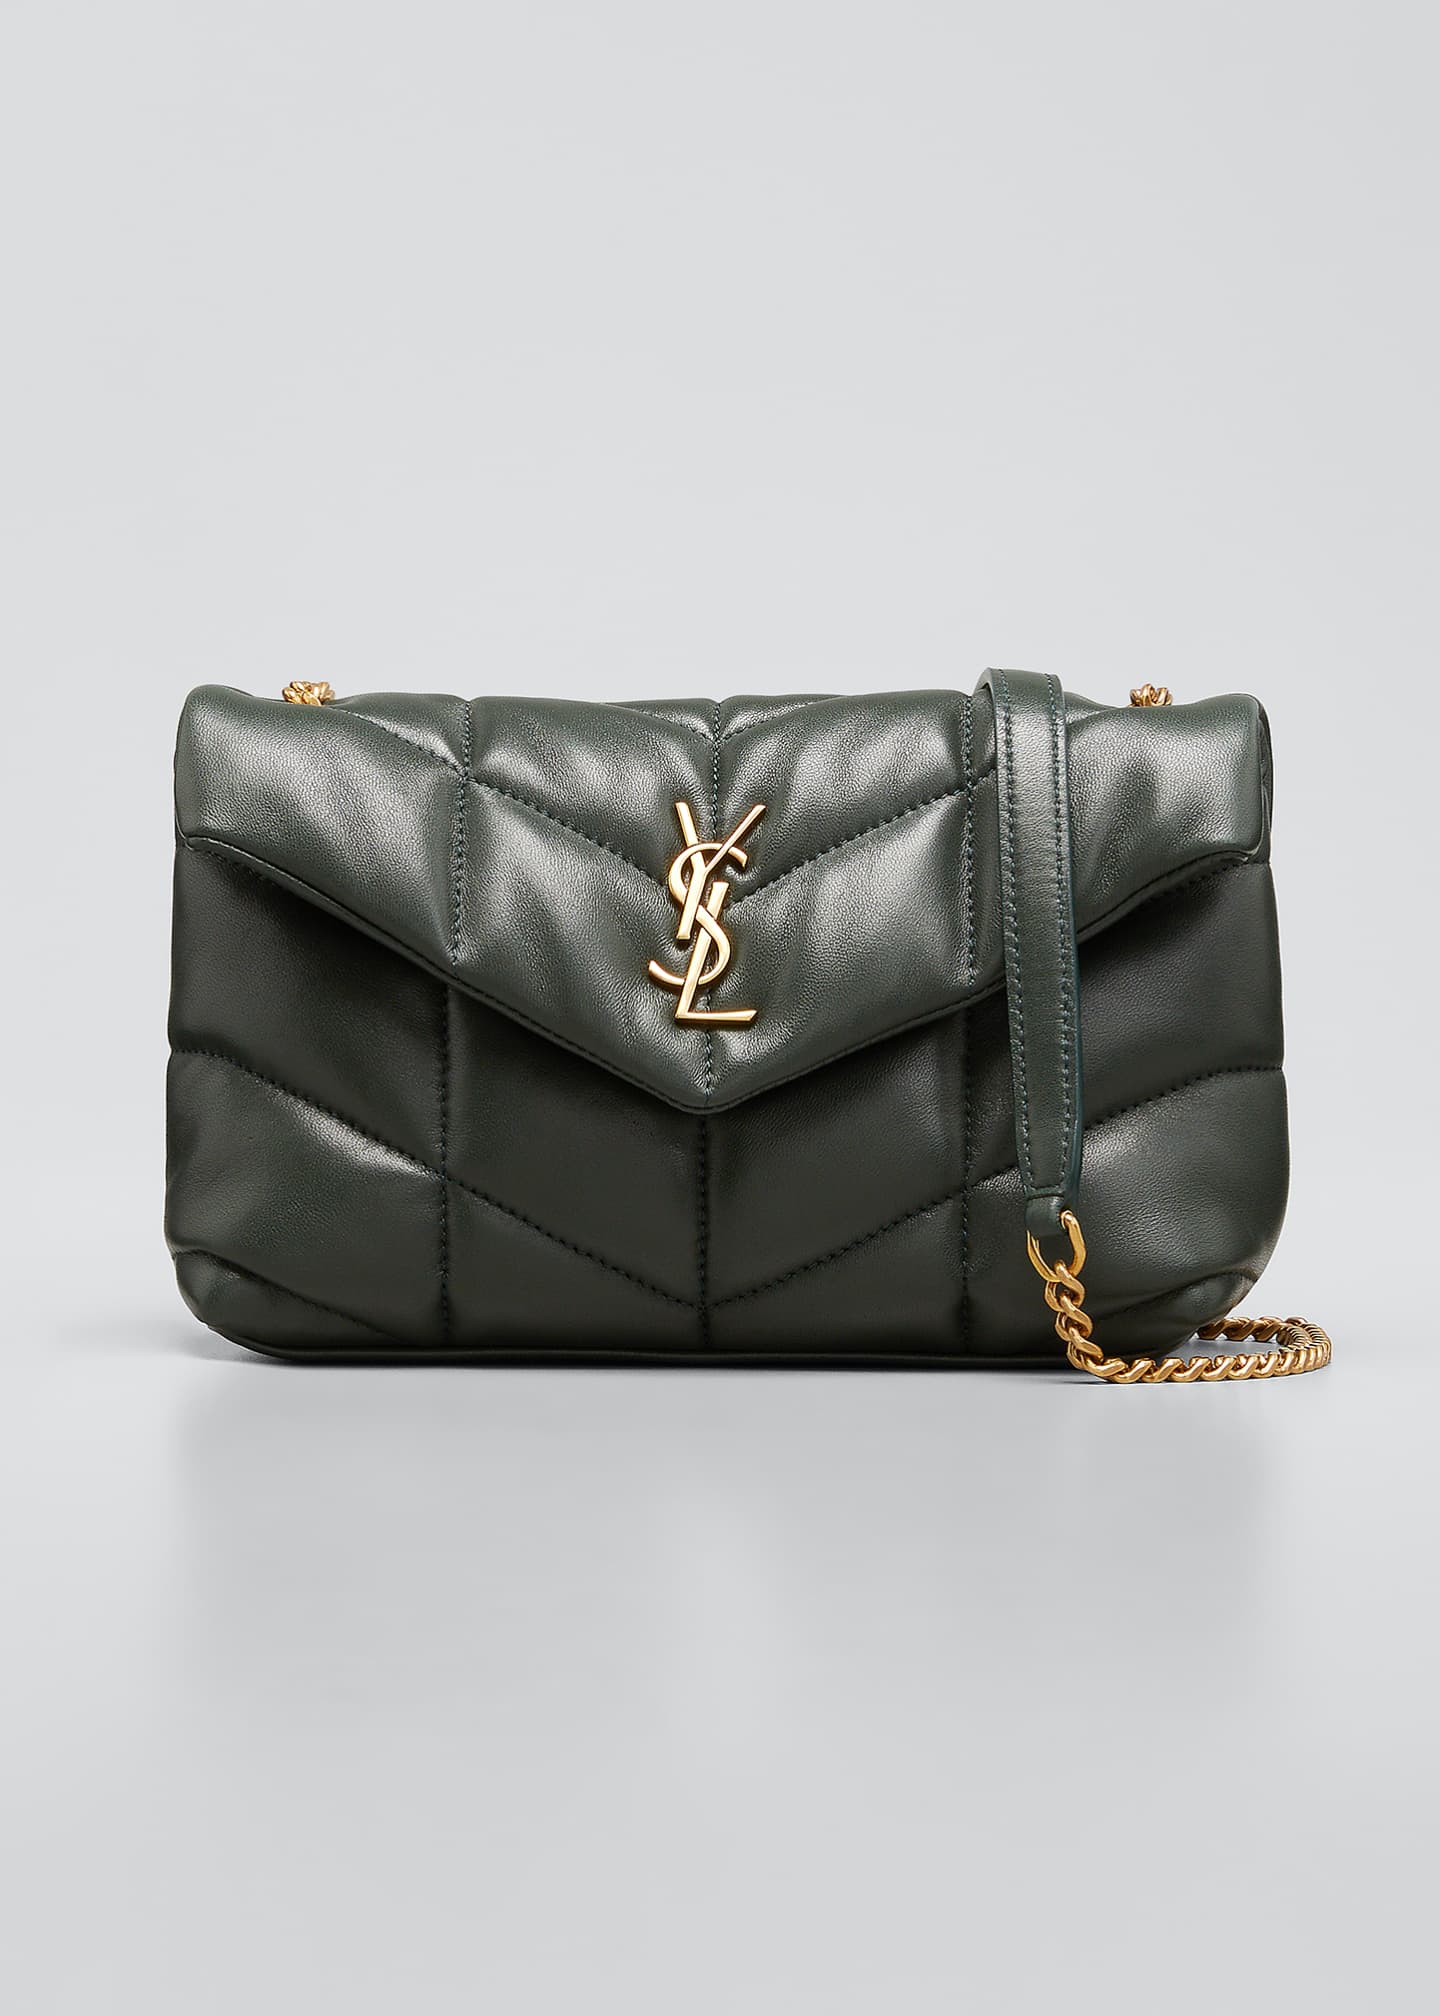 LouLou Toy YSL Puffer Quilted Lambskin Crossbody Bag - Bergdorf Goodman